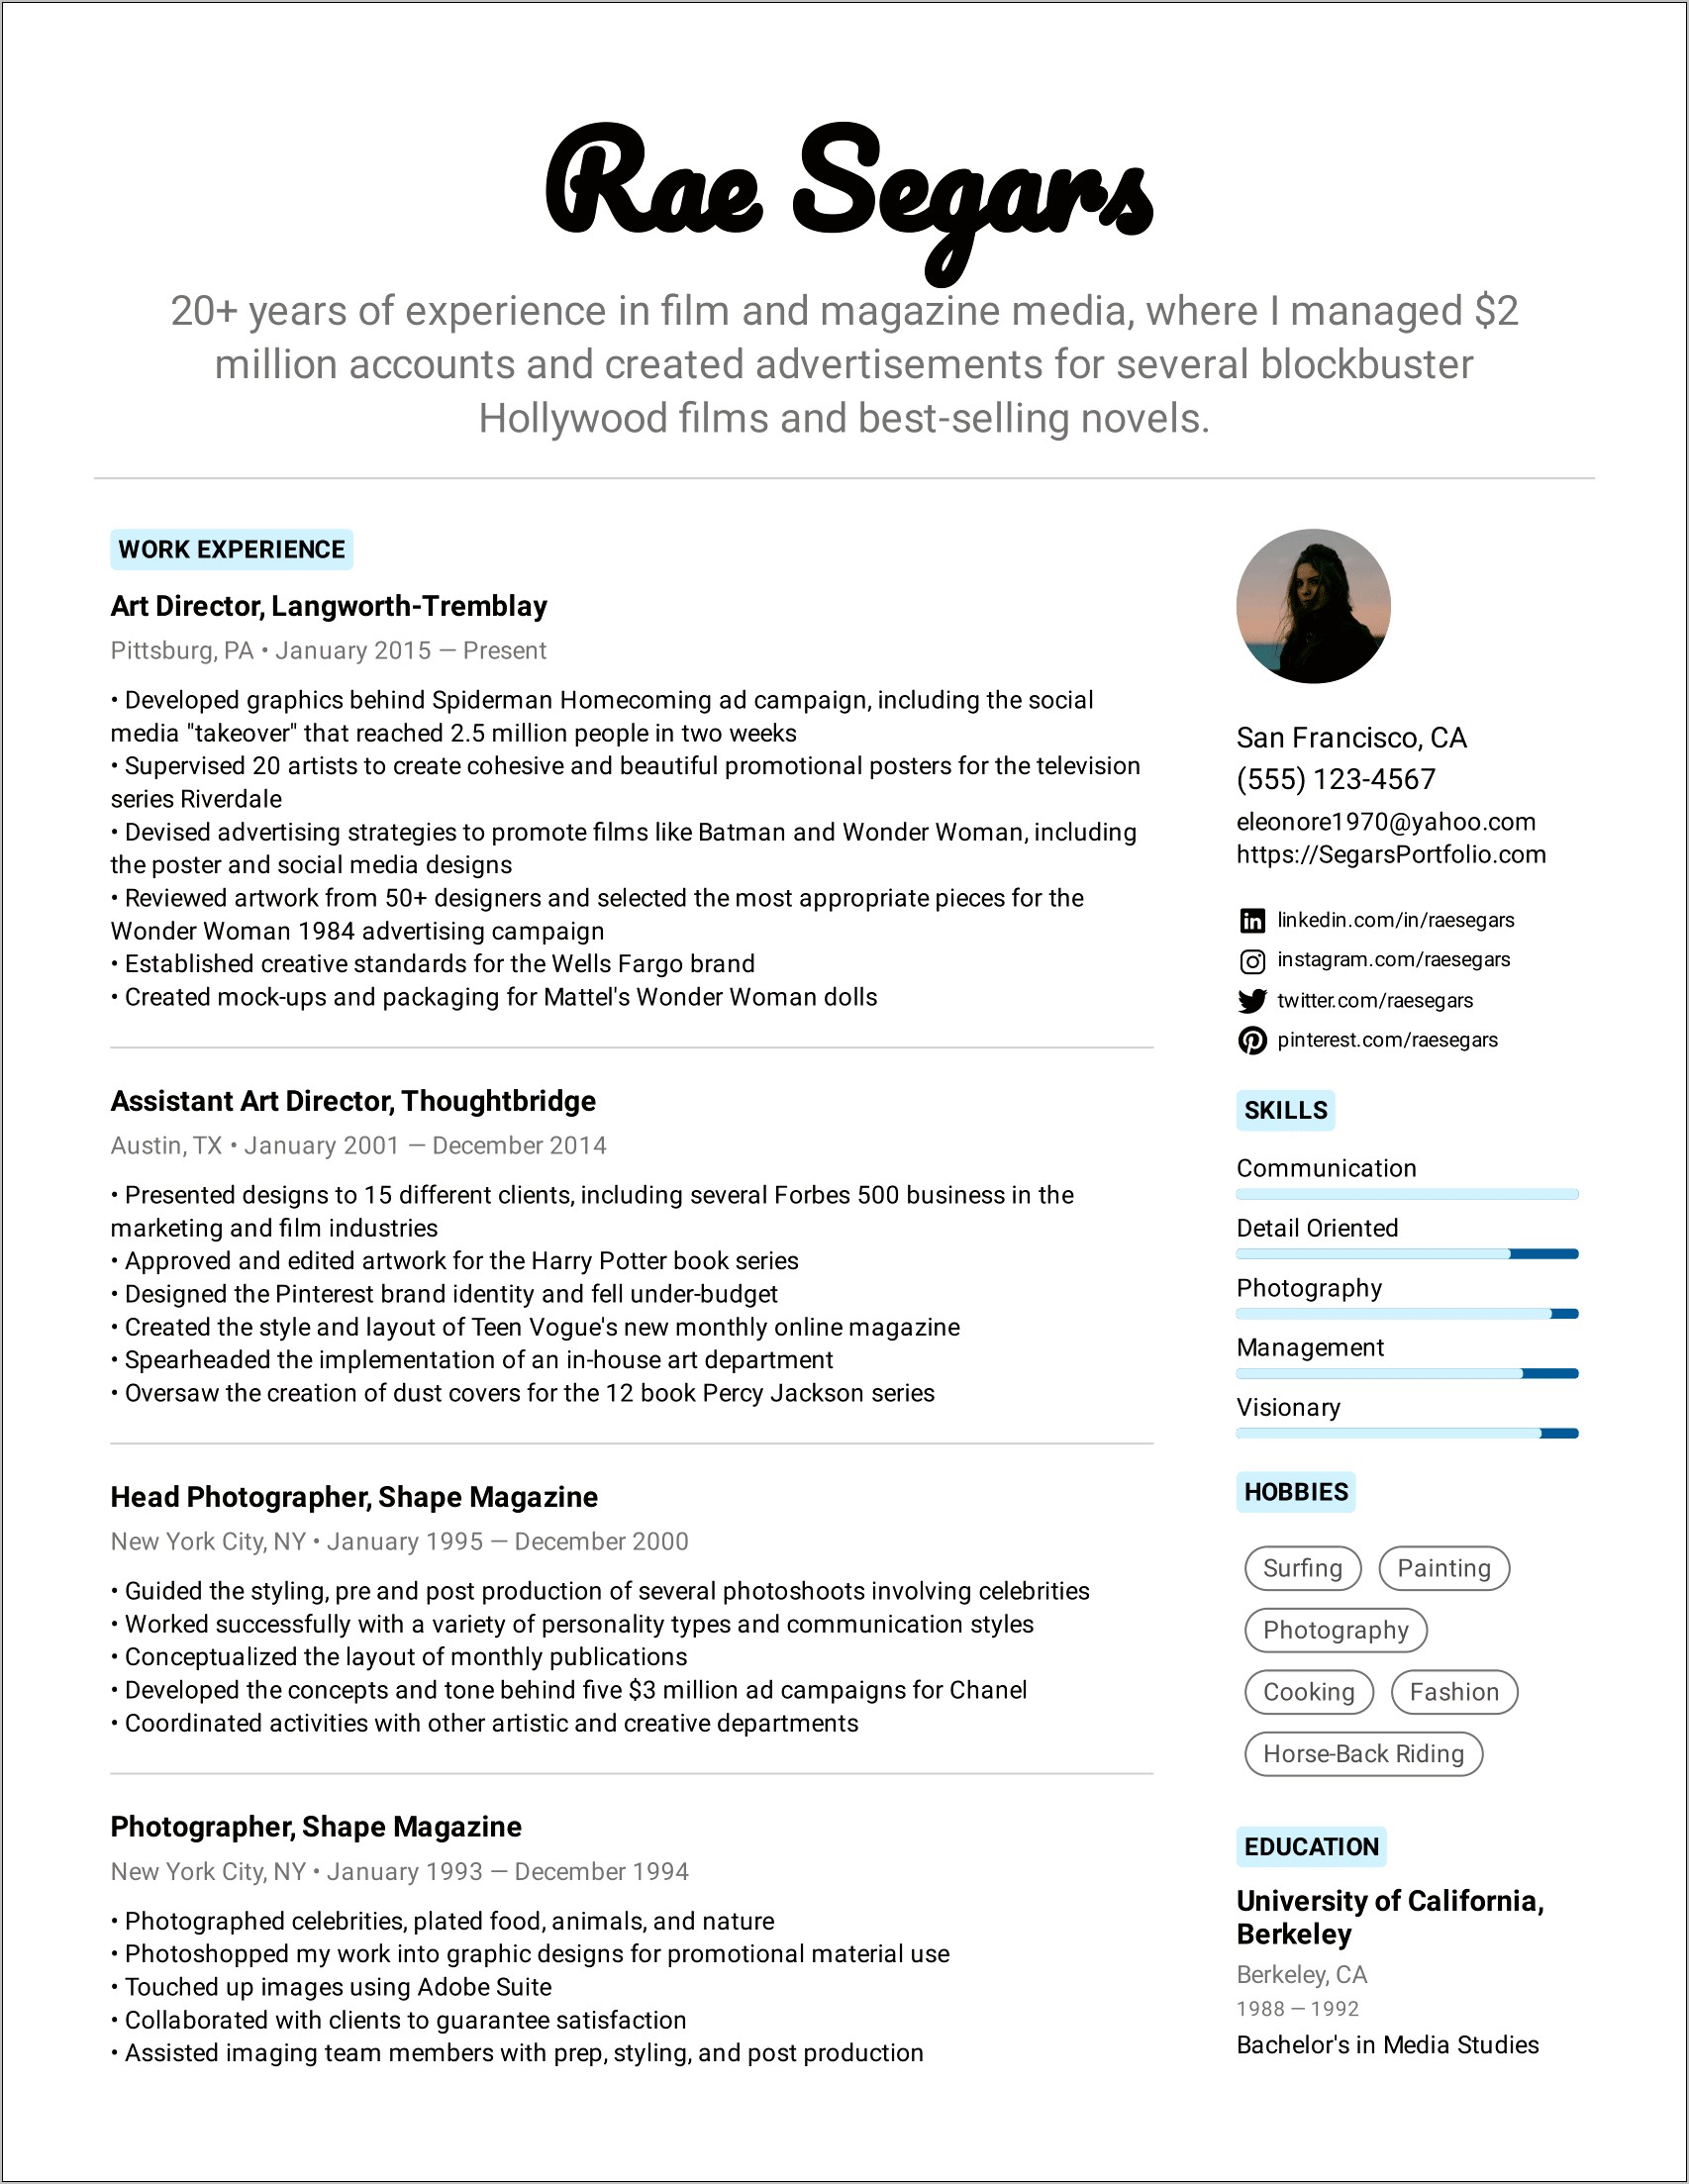 Resume That Reflects Skills And Not Work Experience